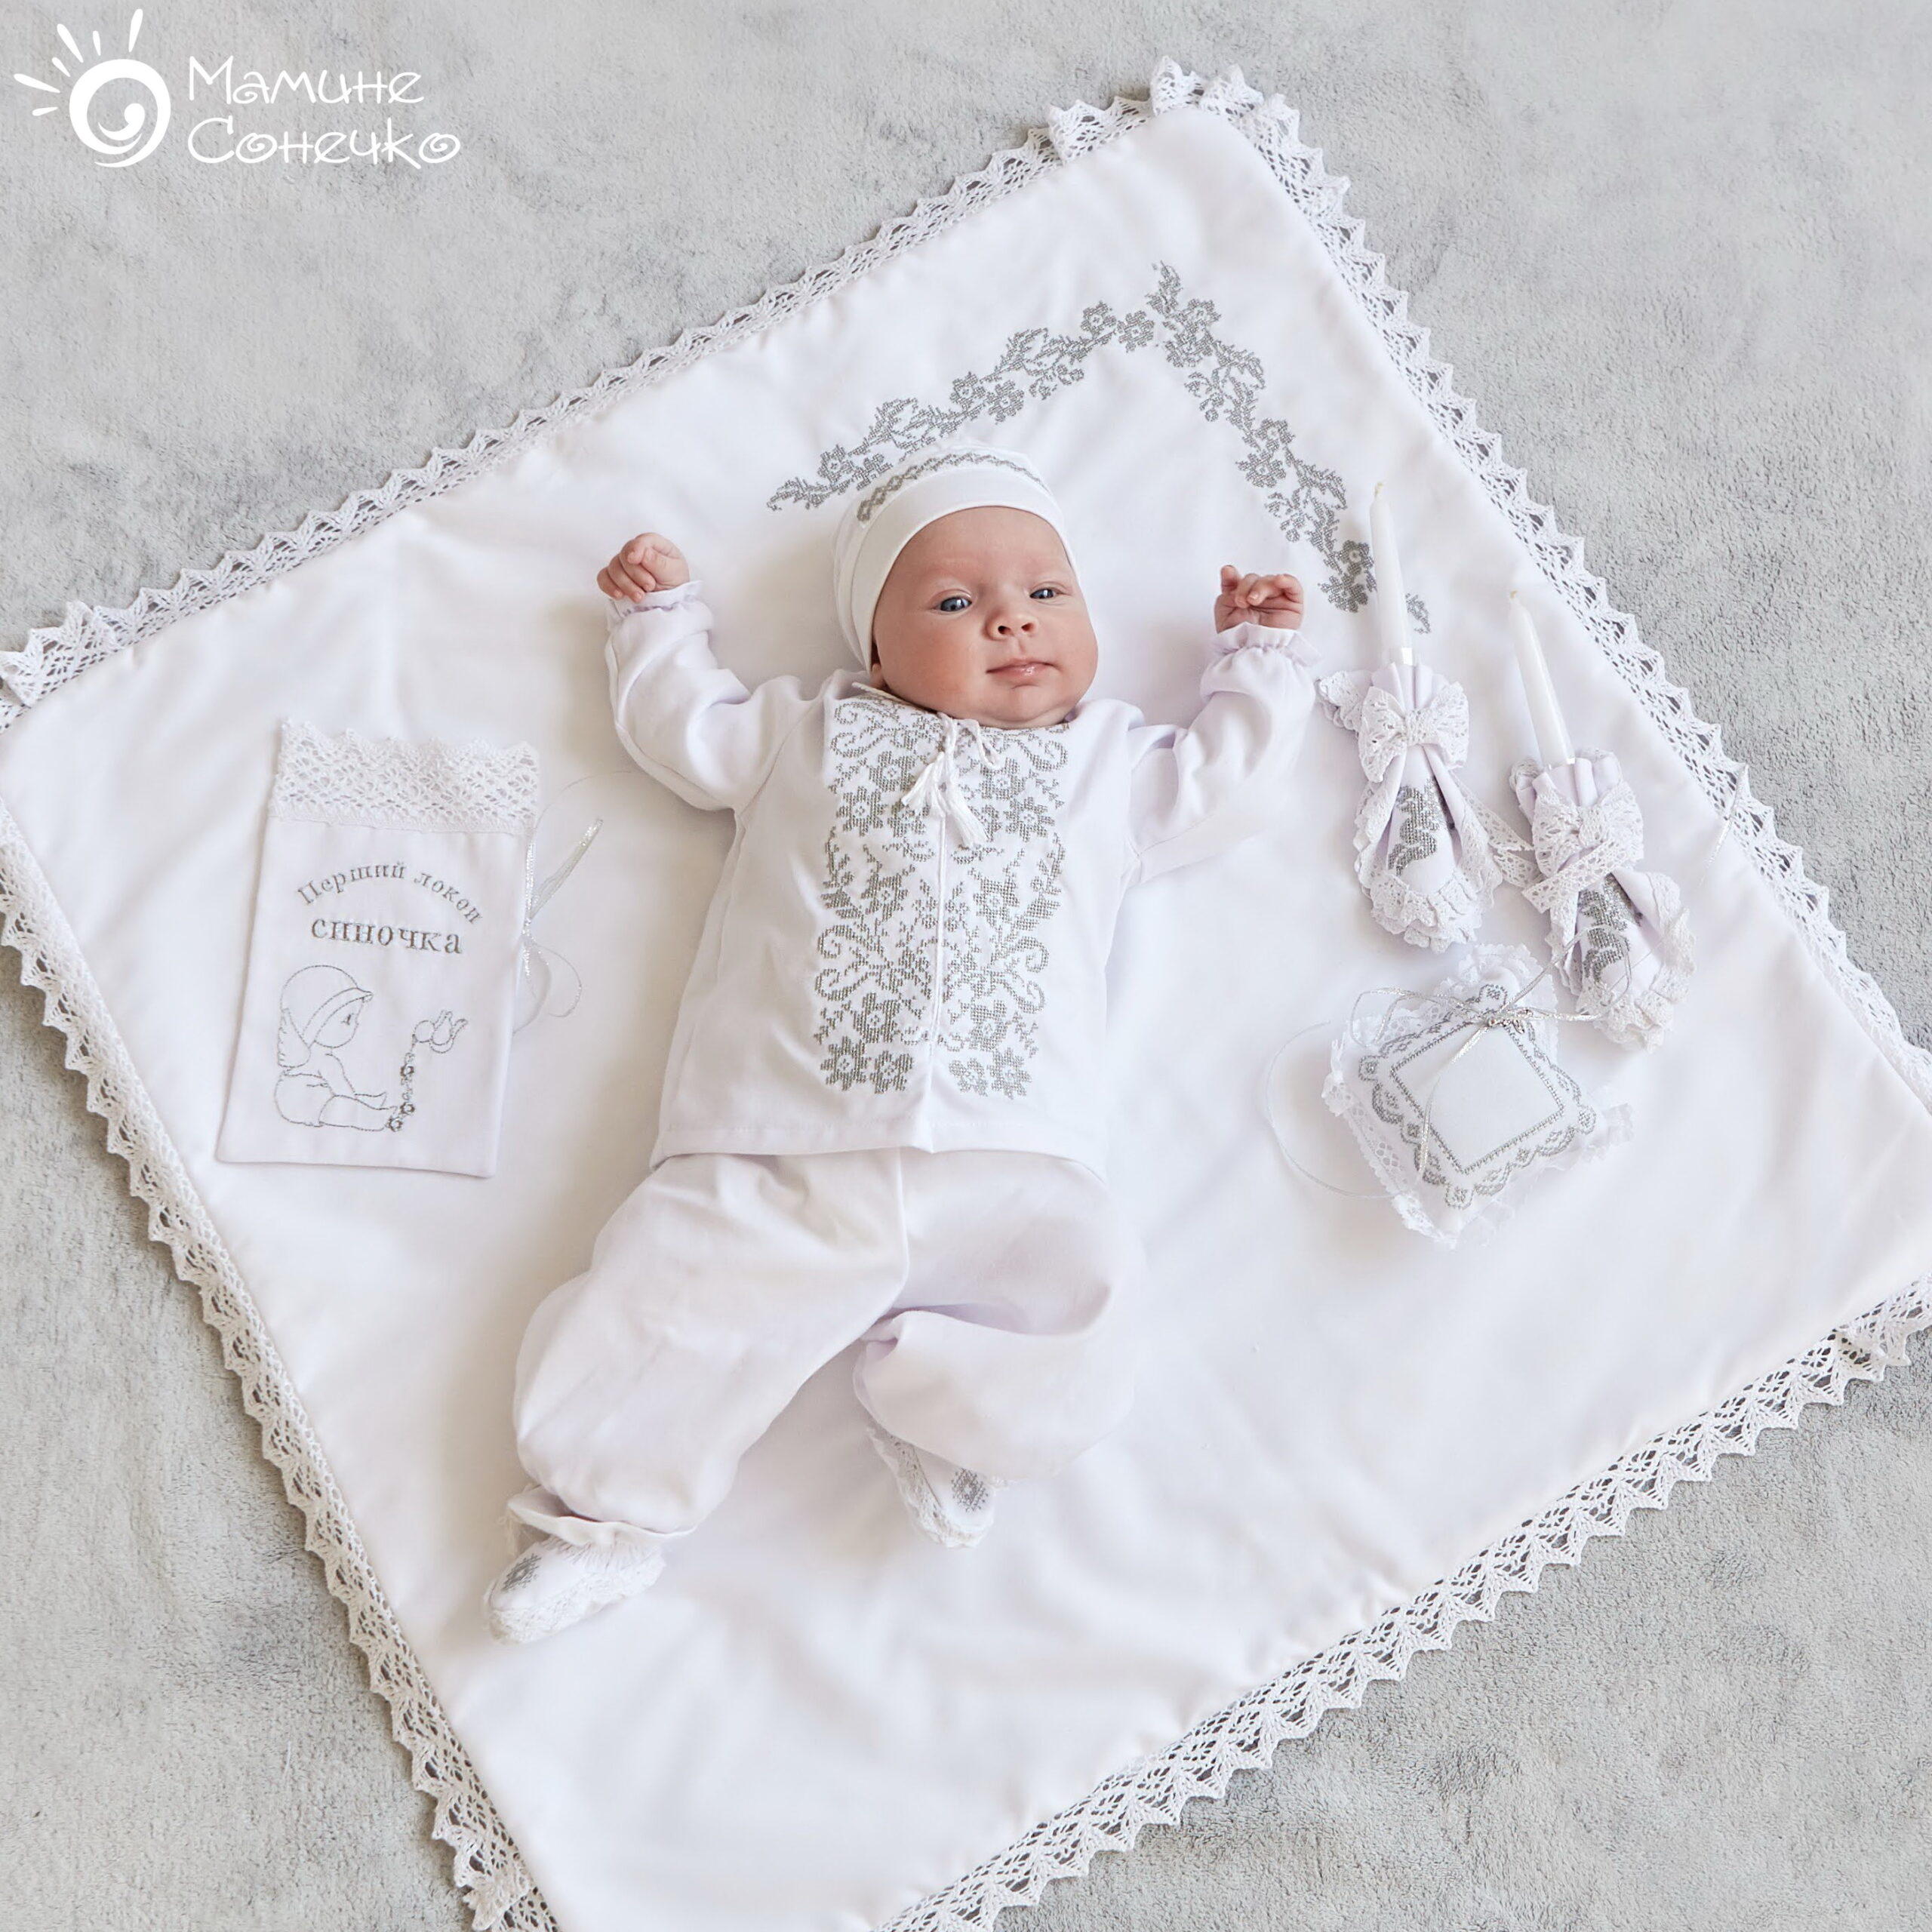 Complete set for baptism of a boy “Monochrome flowers” silver, linen